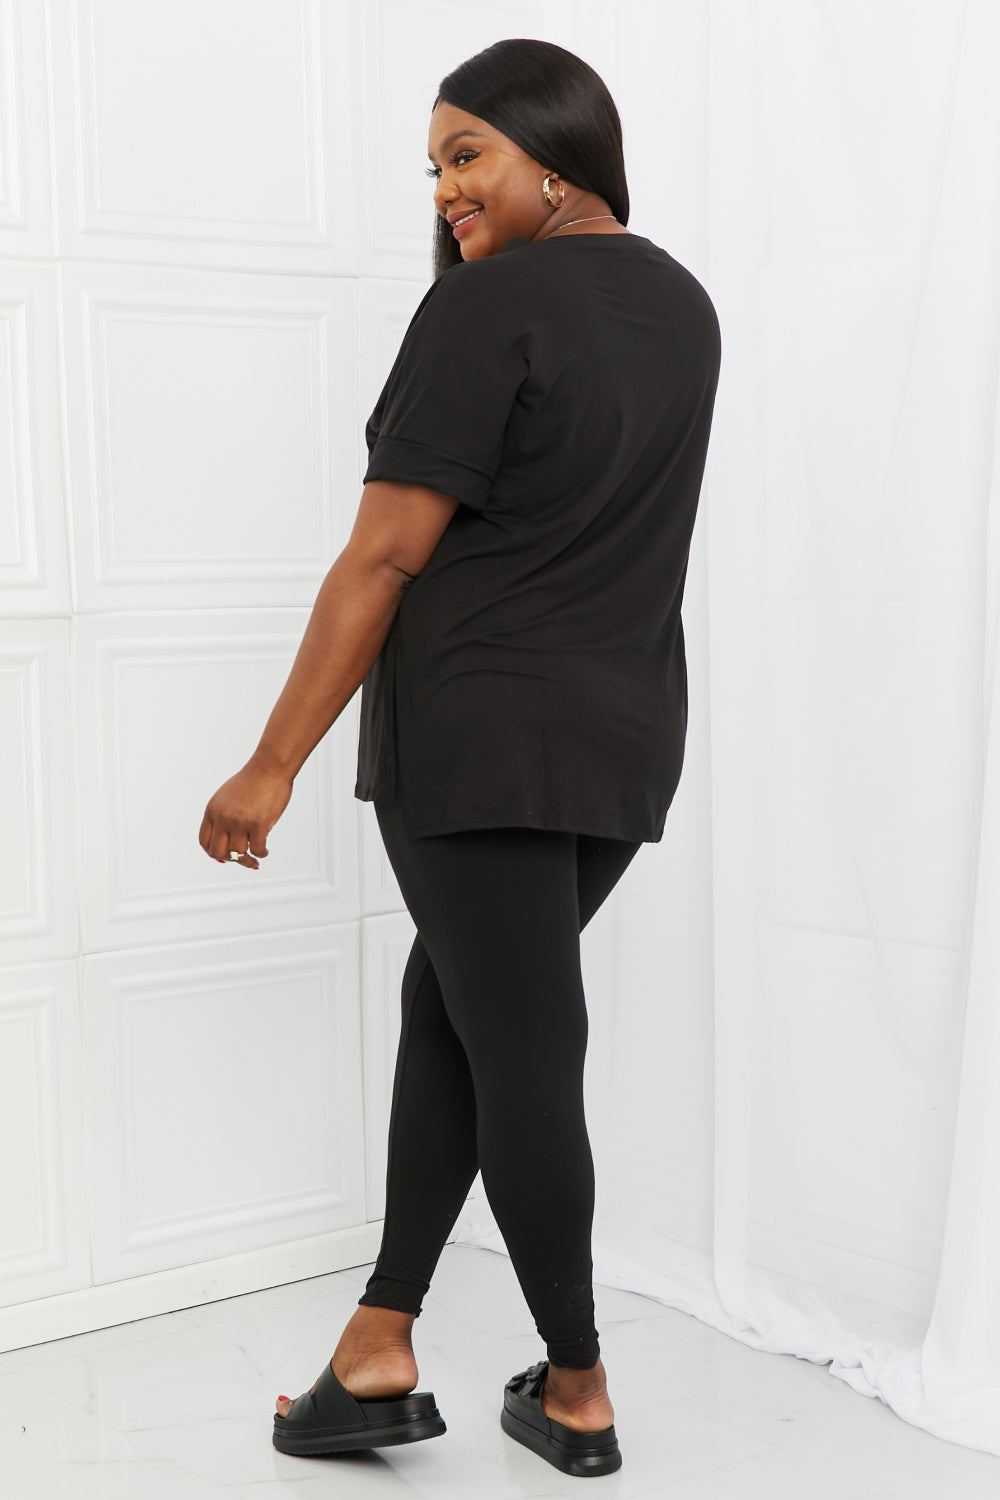 Self Love Full Size Brushed DTY Microfiber Lounge Set in Black - Women’s Clothing & Accessories - Shirts & Tops - 2